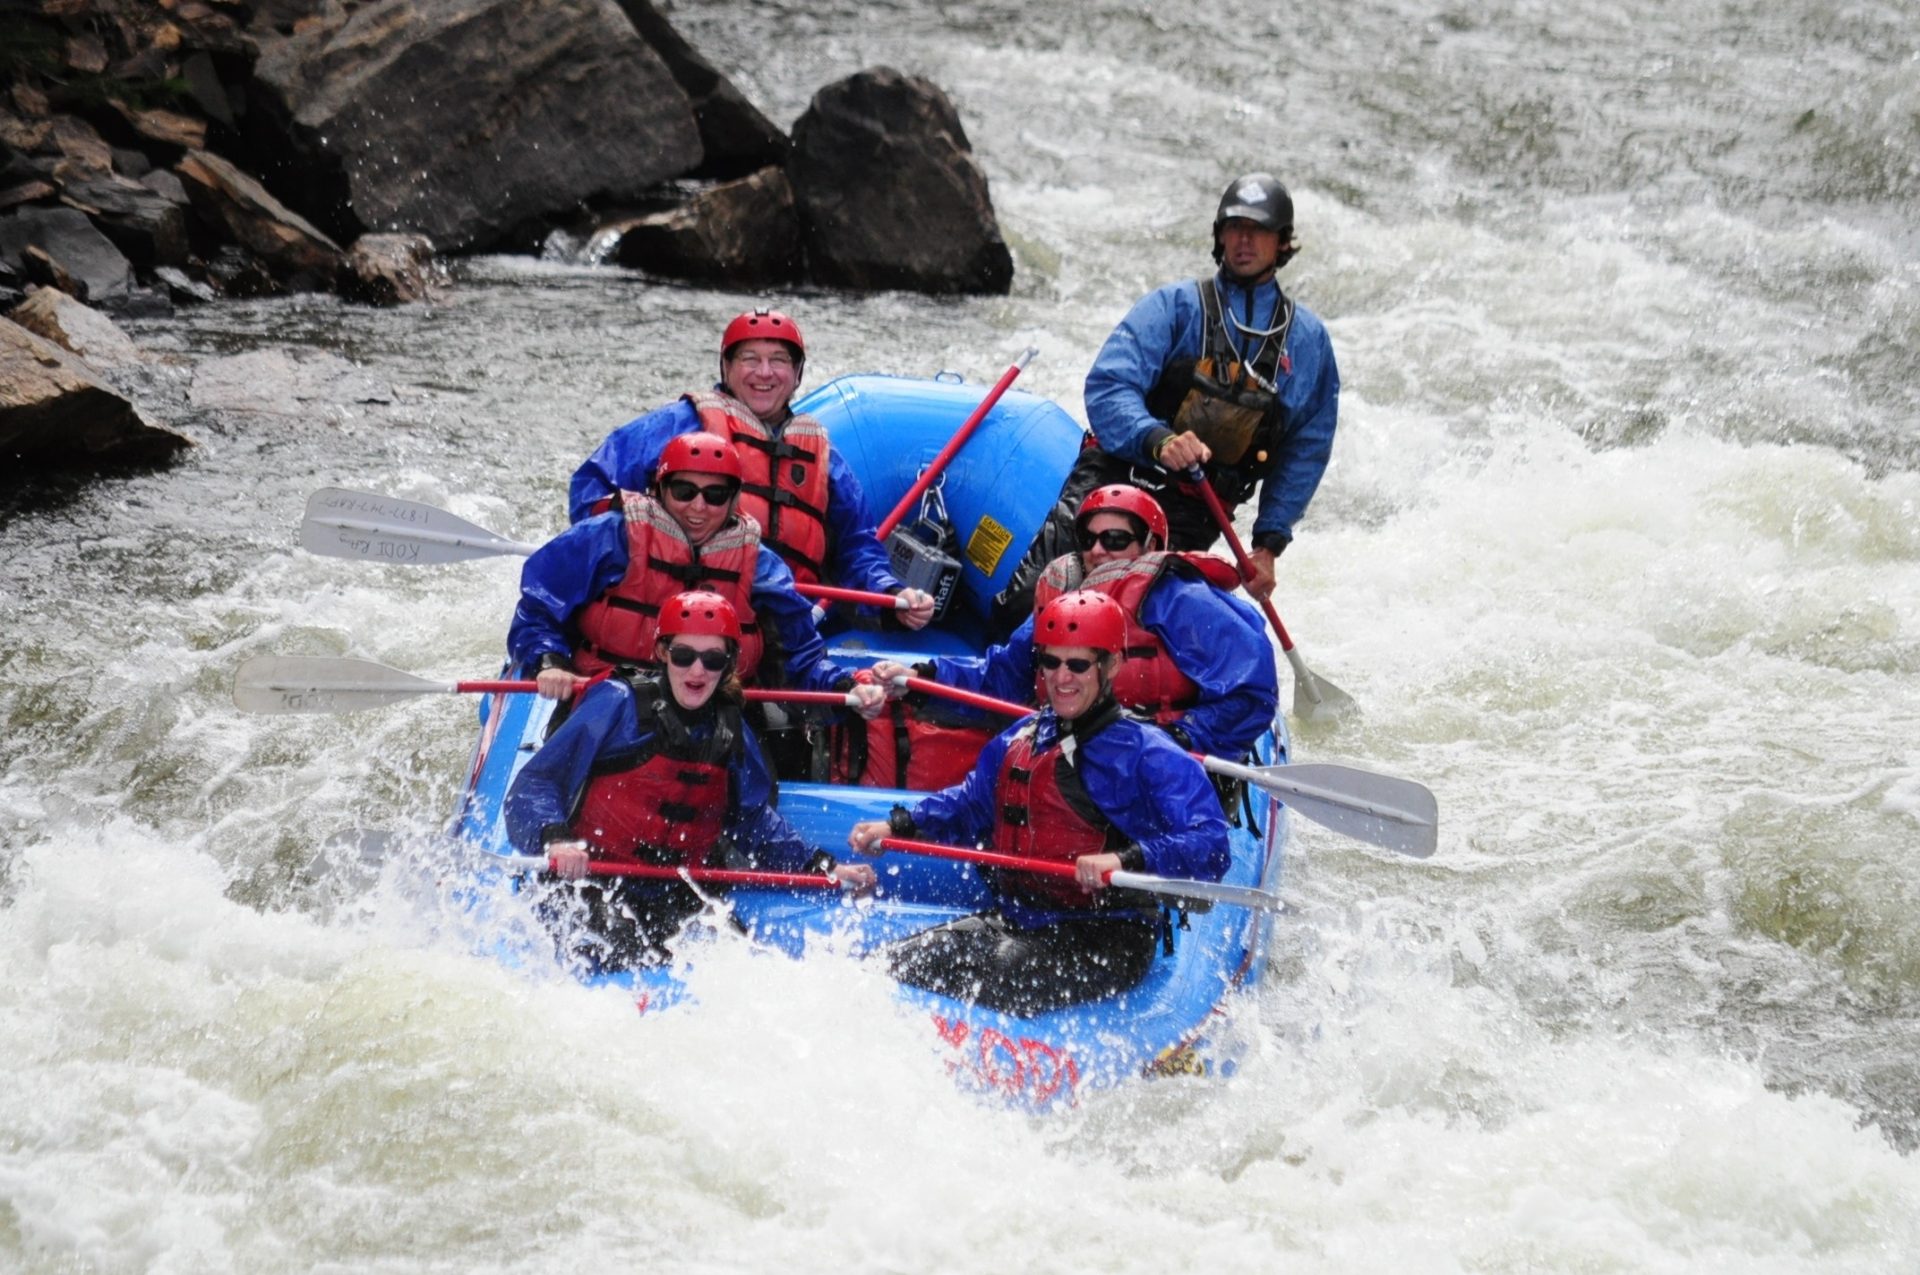 Try Clear Creek rafting and you will return to experience the sense of freedom and adventure again